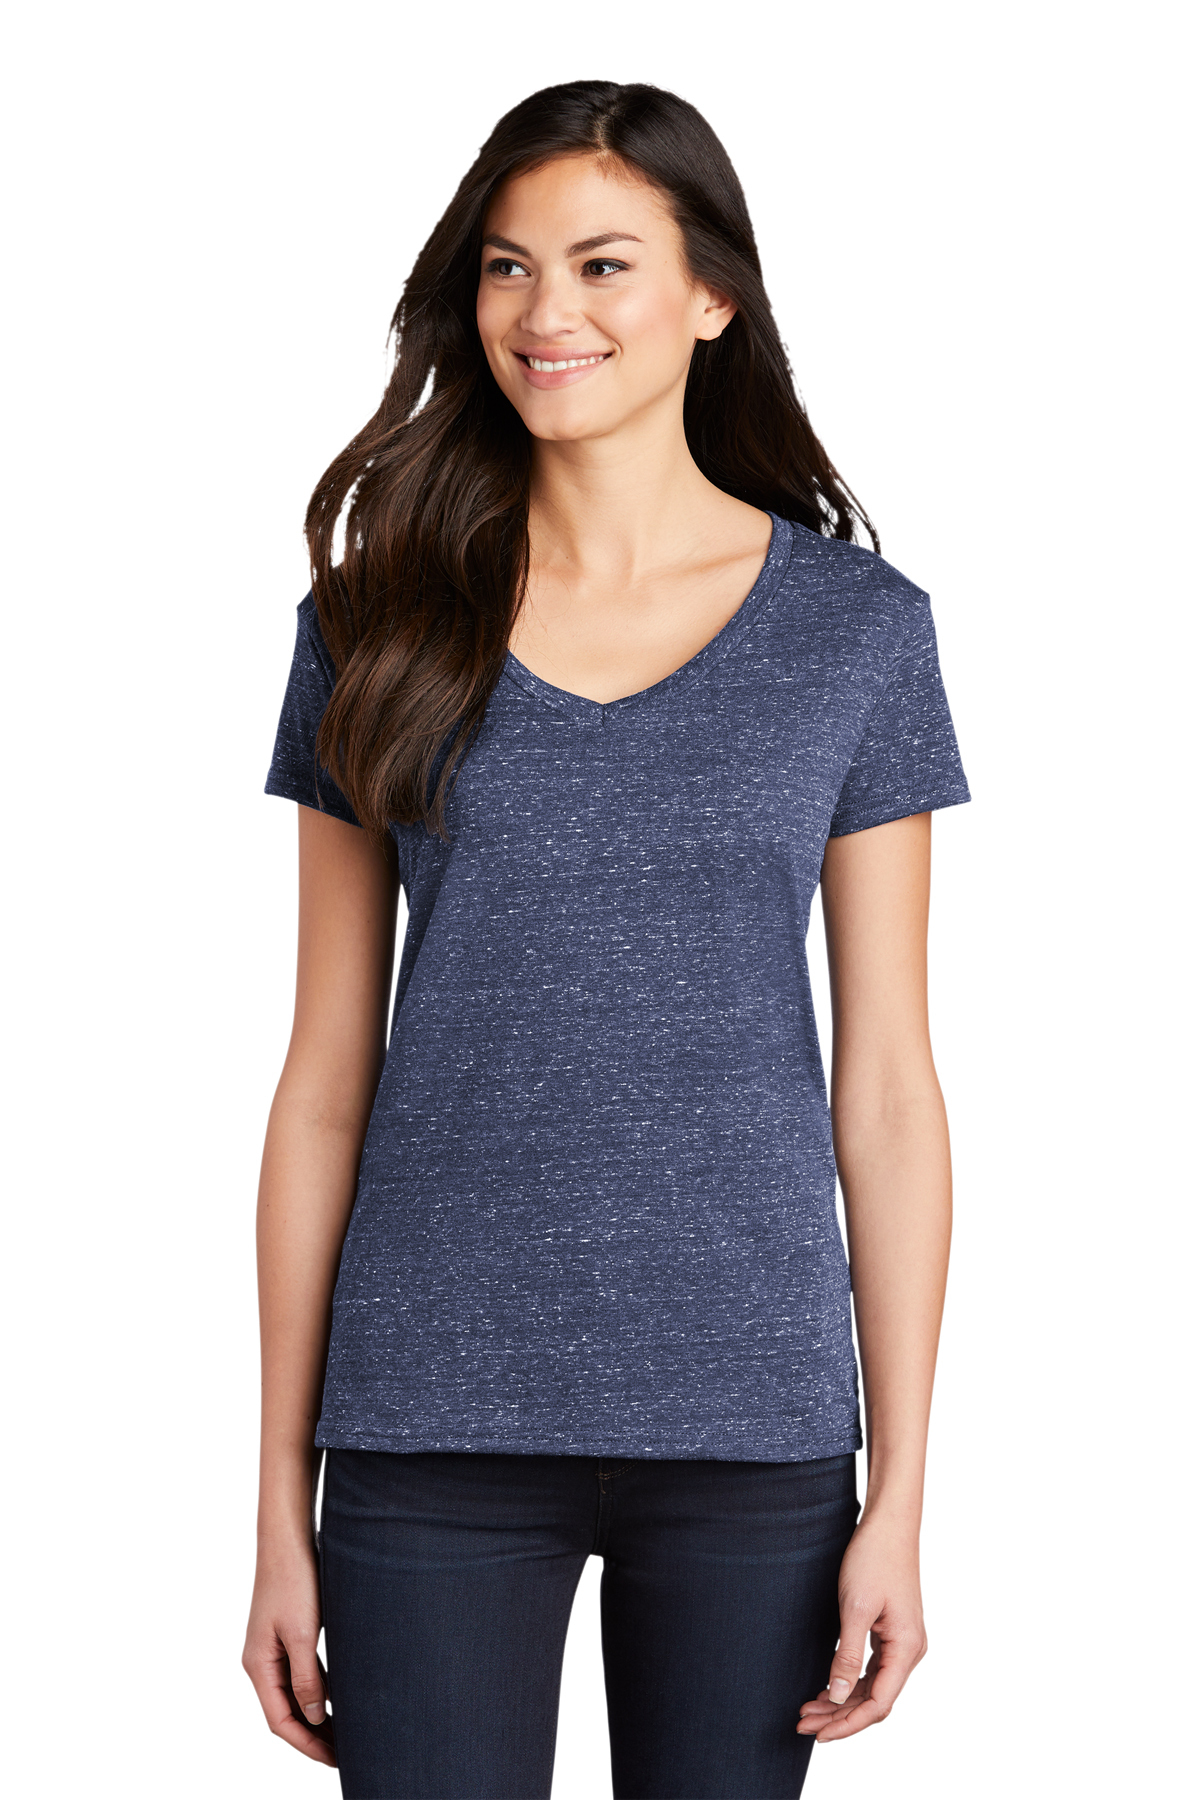 District Women’s Cosmic V-Neck Tee | Product | District